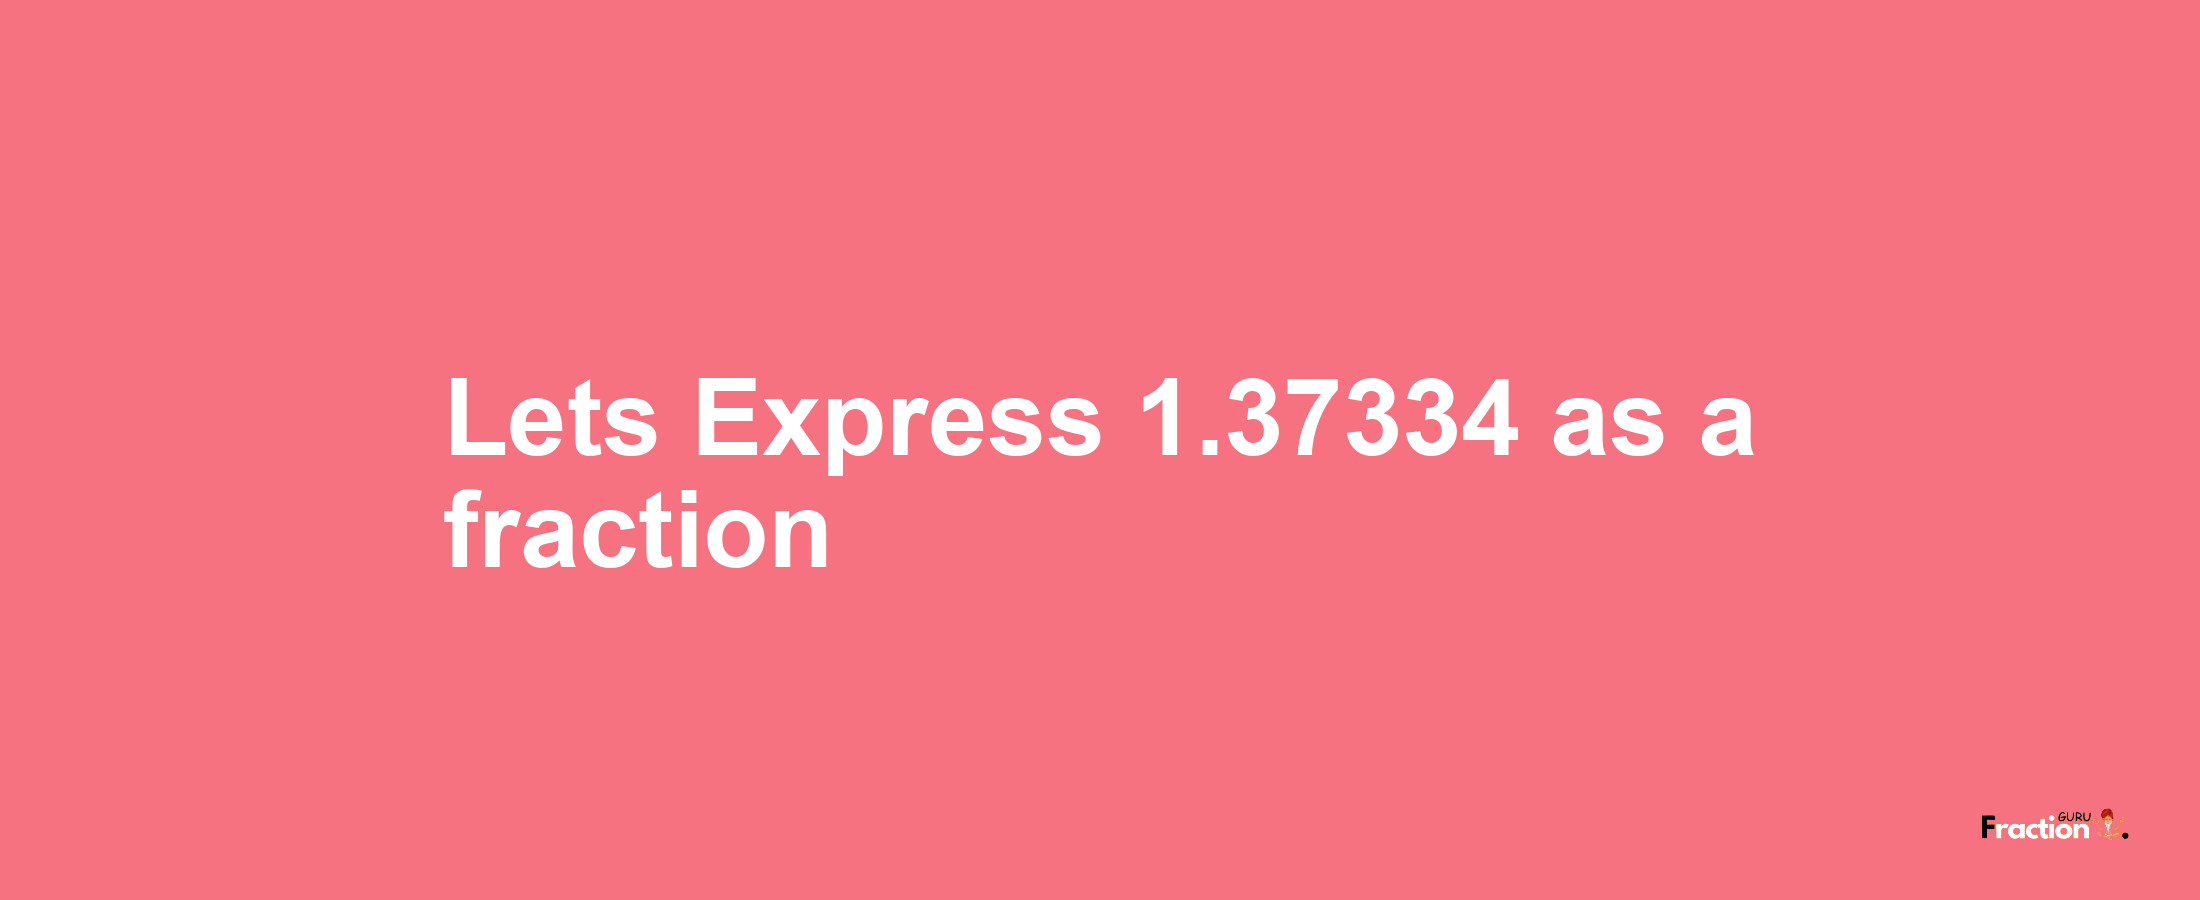 Lets Express 1.37334 as afraction